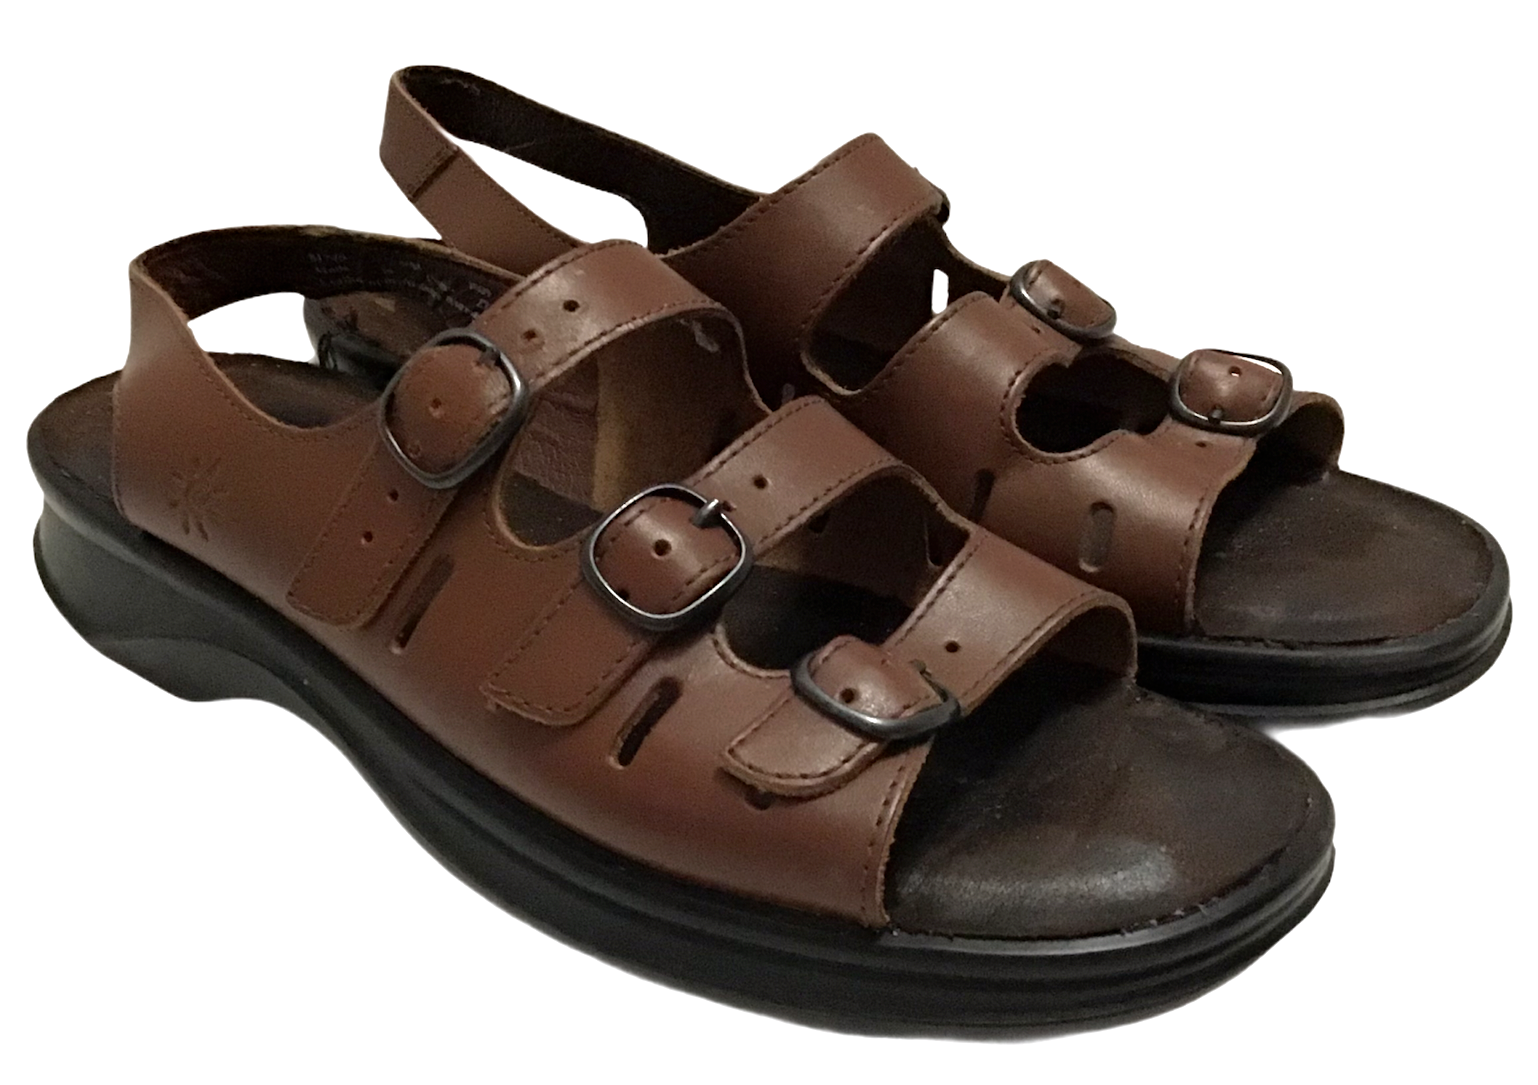 Clarks Sandals Womens 10 and 50 similar